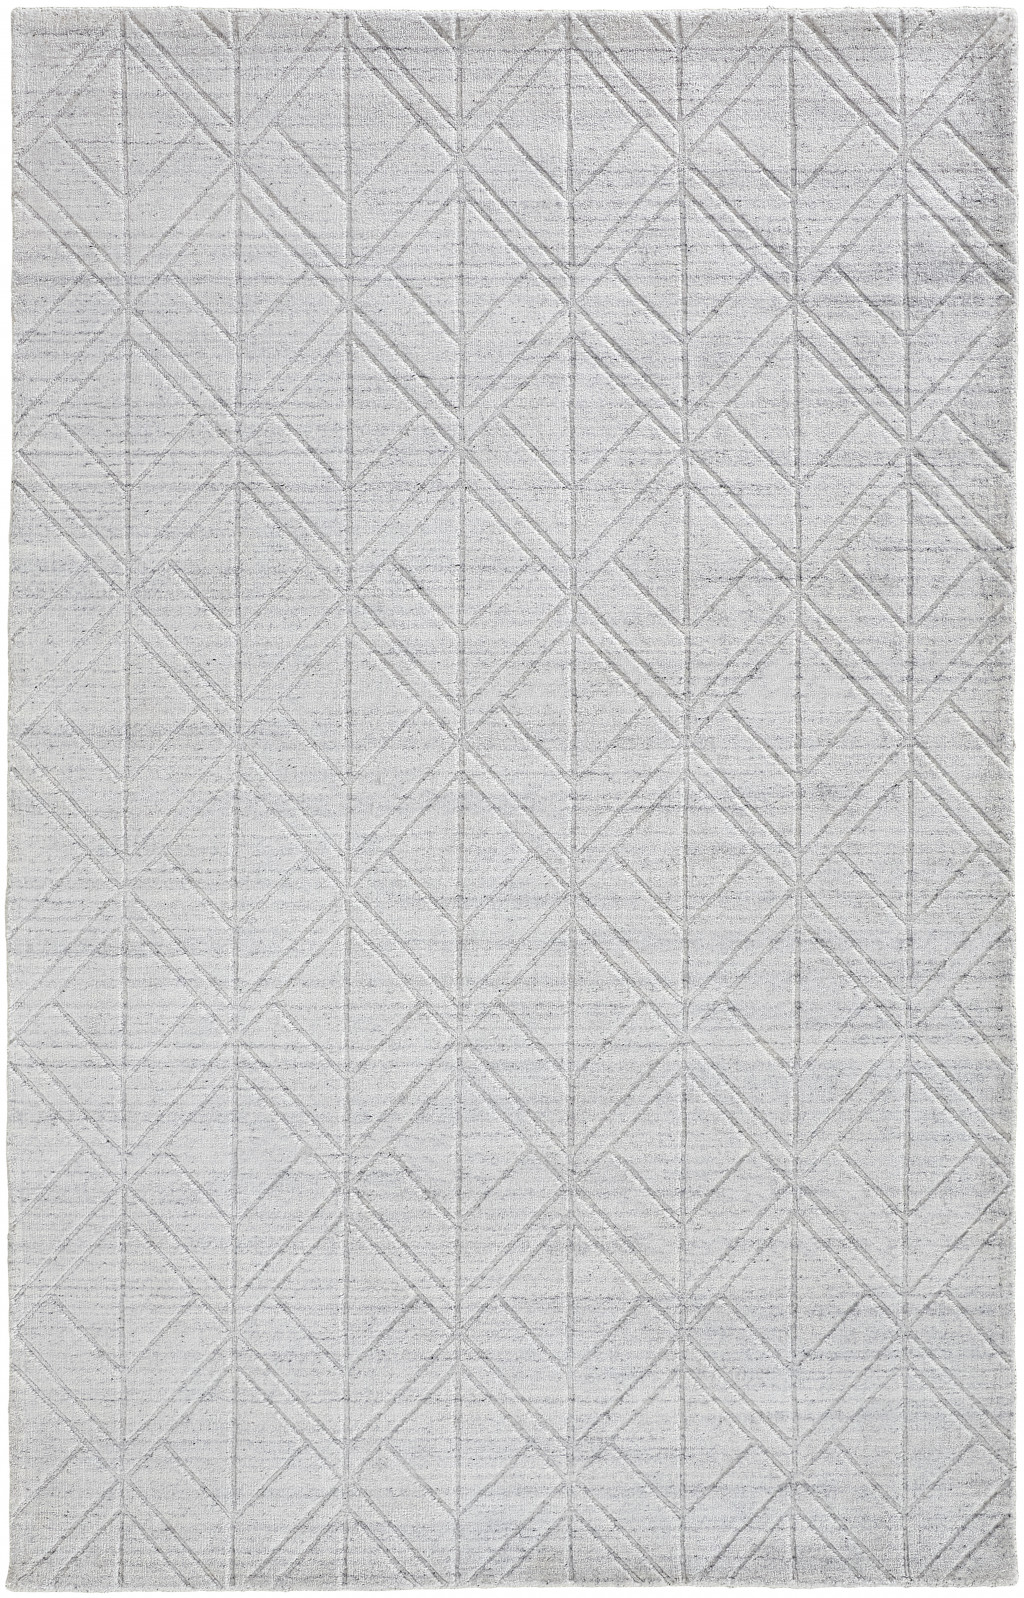 2' X 3' White And Silver Striped Hand Woven Area Rug-514783-1